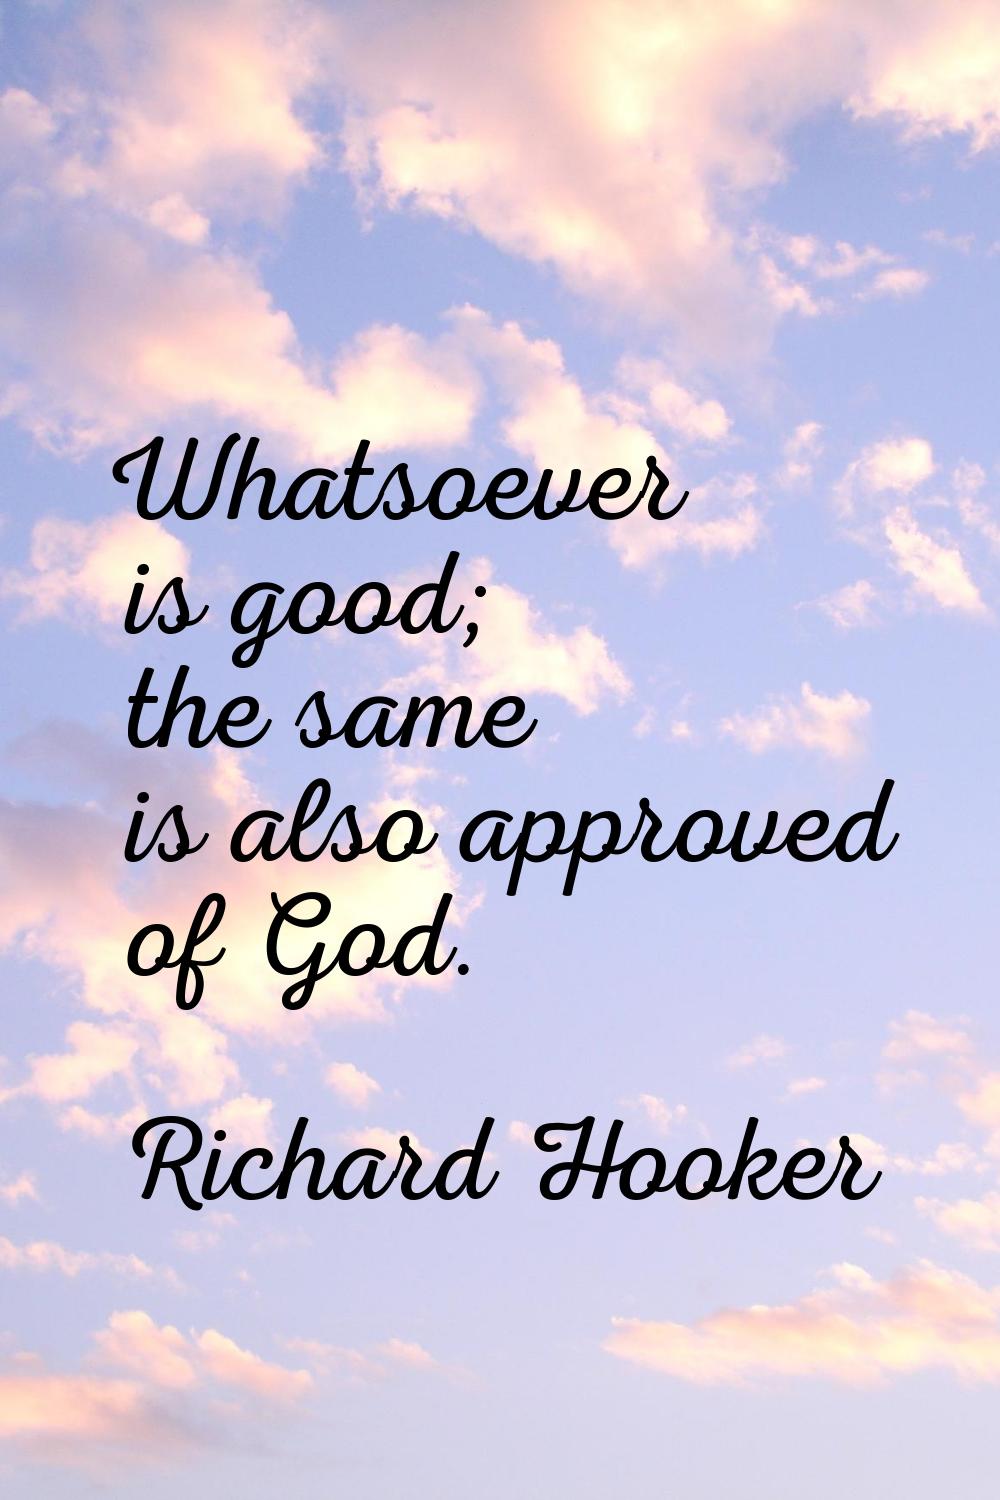 Whatsoever is good; the same is also approved of God.